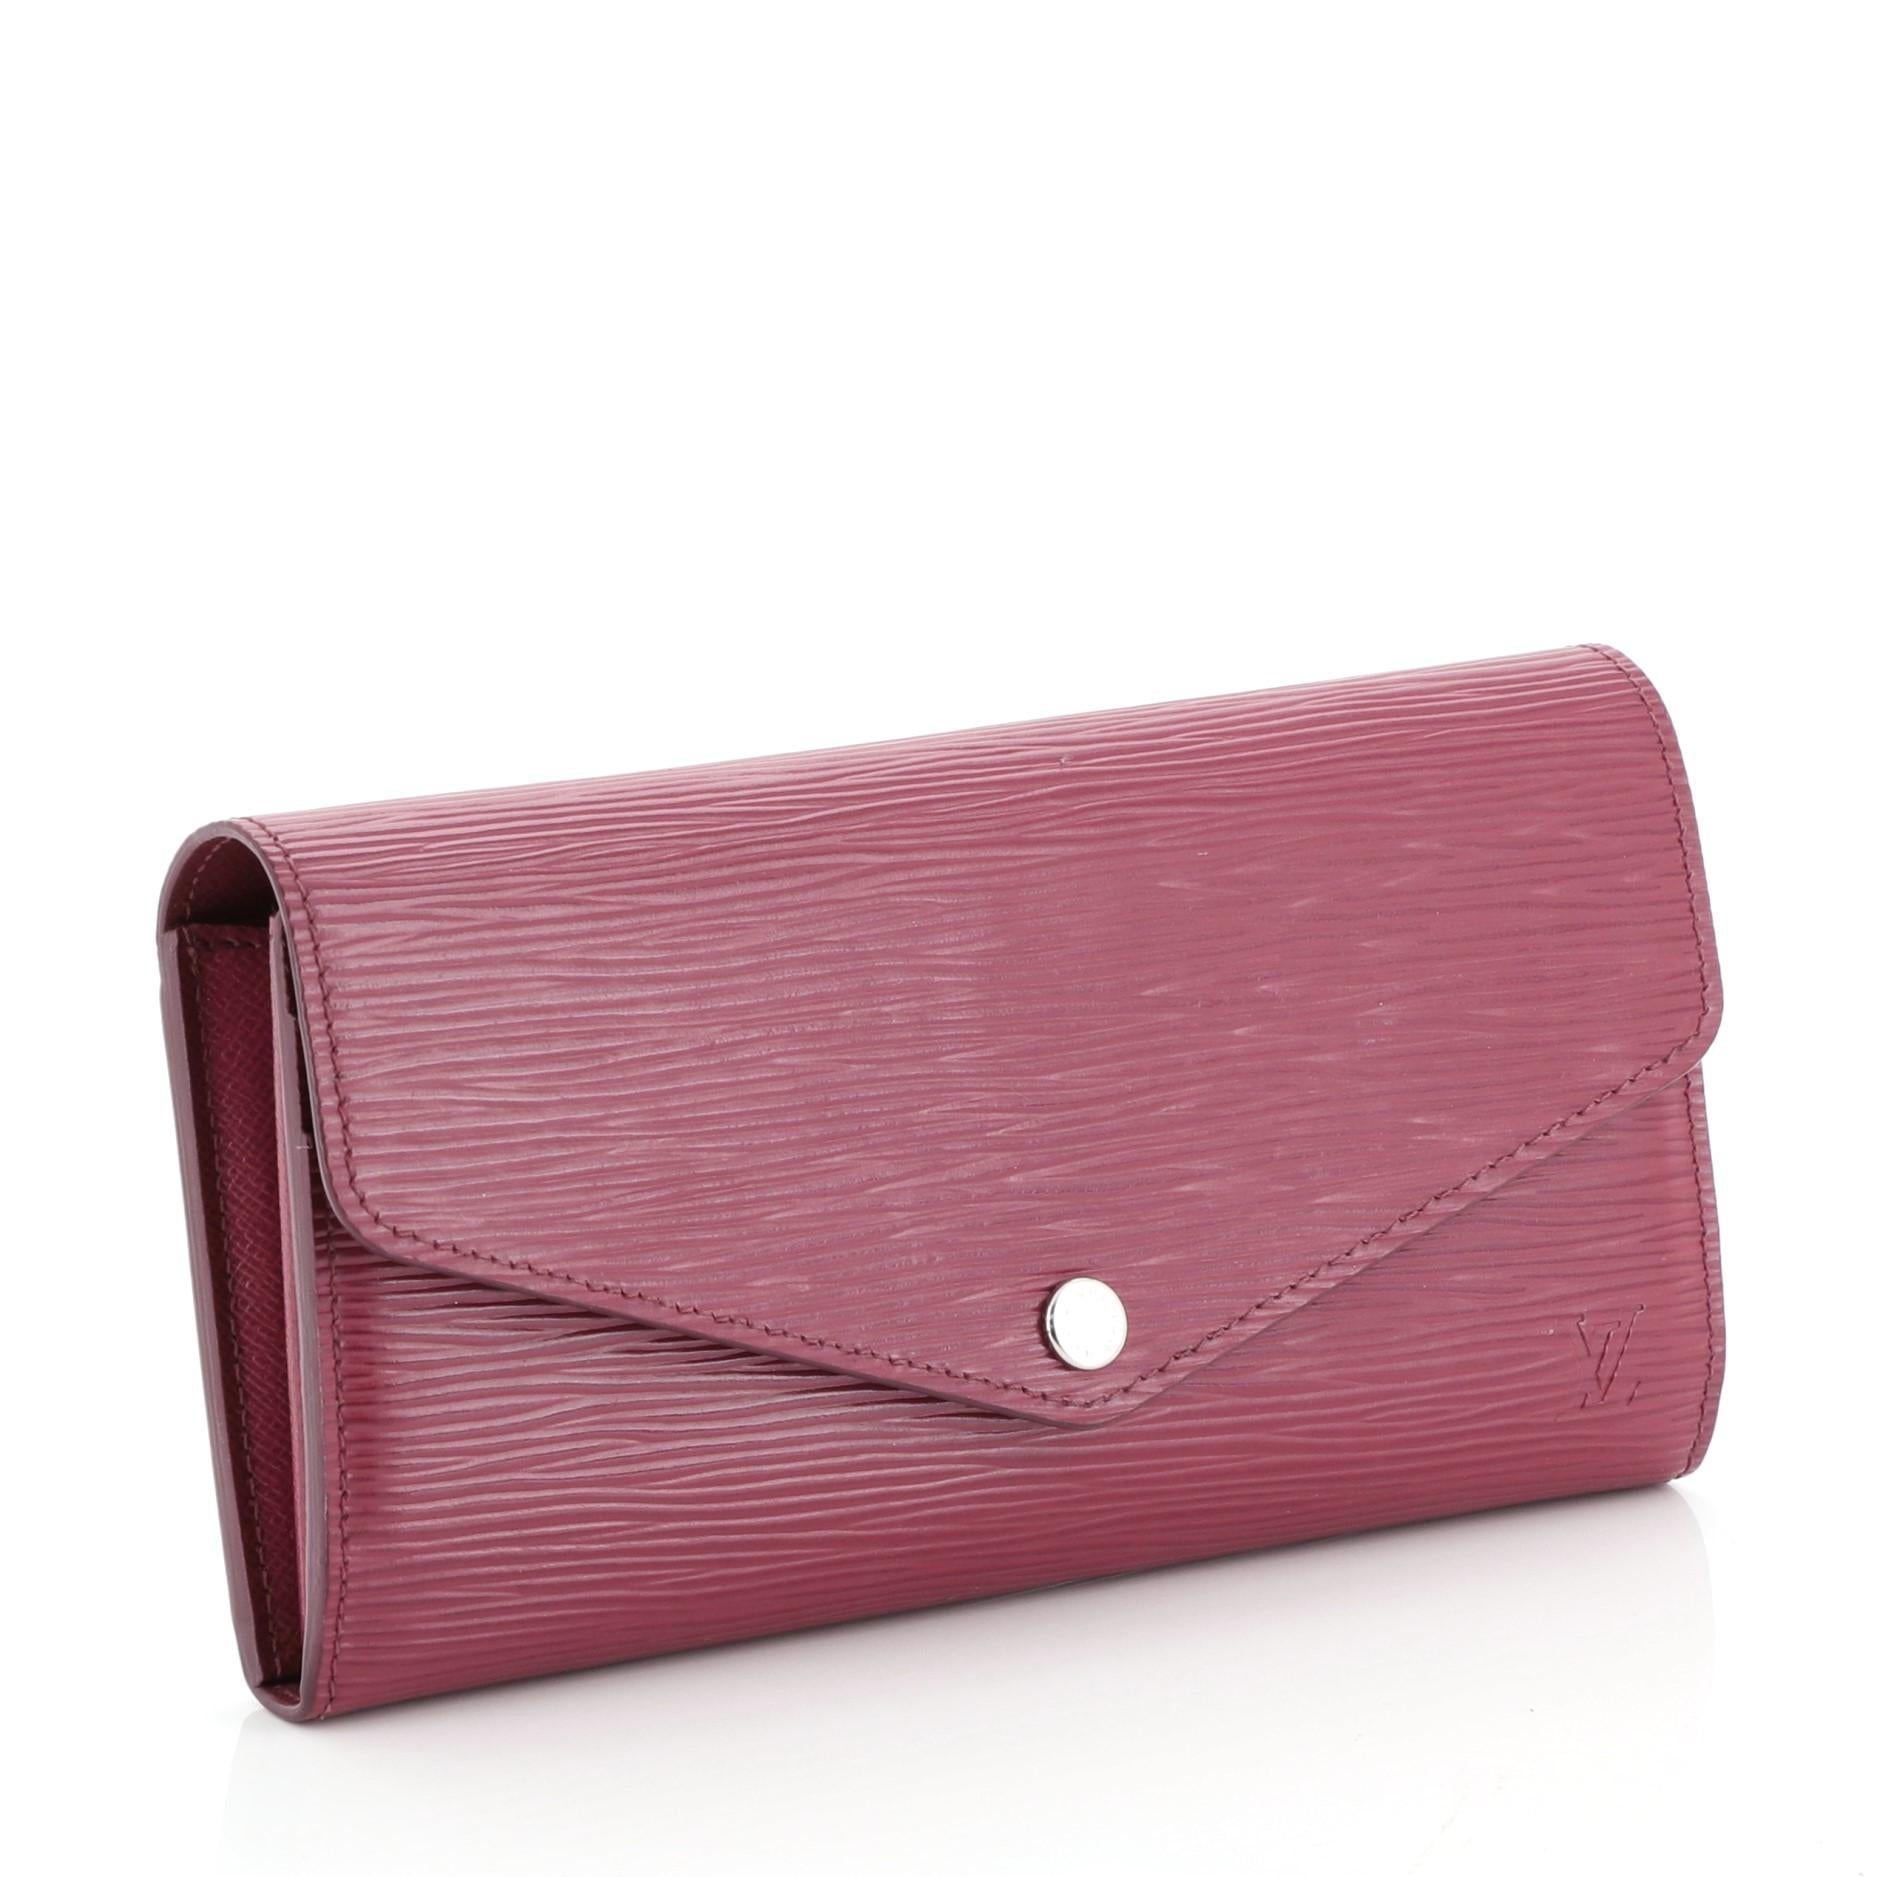 This Louis Vuitton Sarah Wallet NM Epi Leather is a perfect everyday accessory. Crafted from pink epi leather, it features an envelope-style frontal flap and silver-tone hardware. Its snap button closure opens to a pink leather interior with